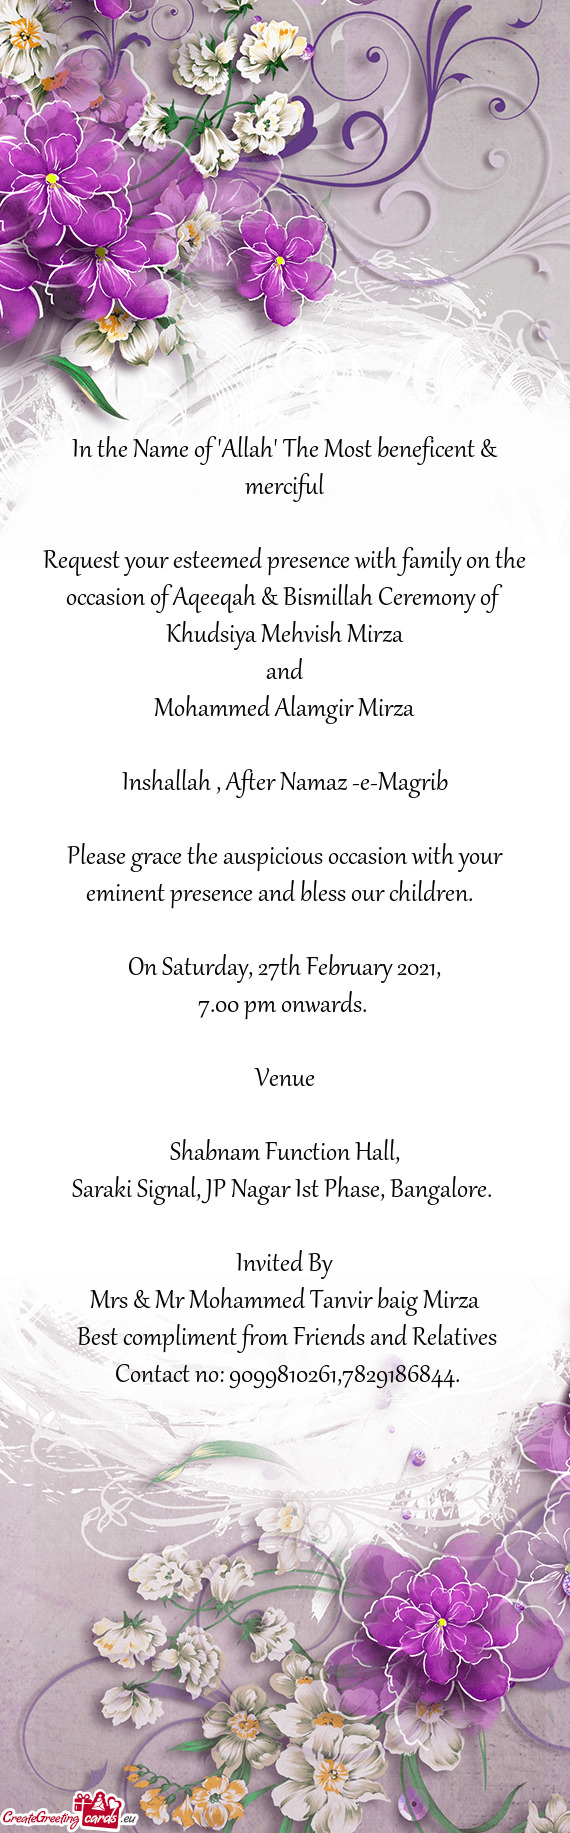 Request your esteemed presence with family on the occasion of Aqeeqah & Bismillah Ceremony of Khudsi